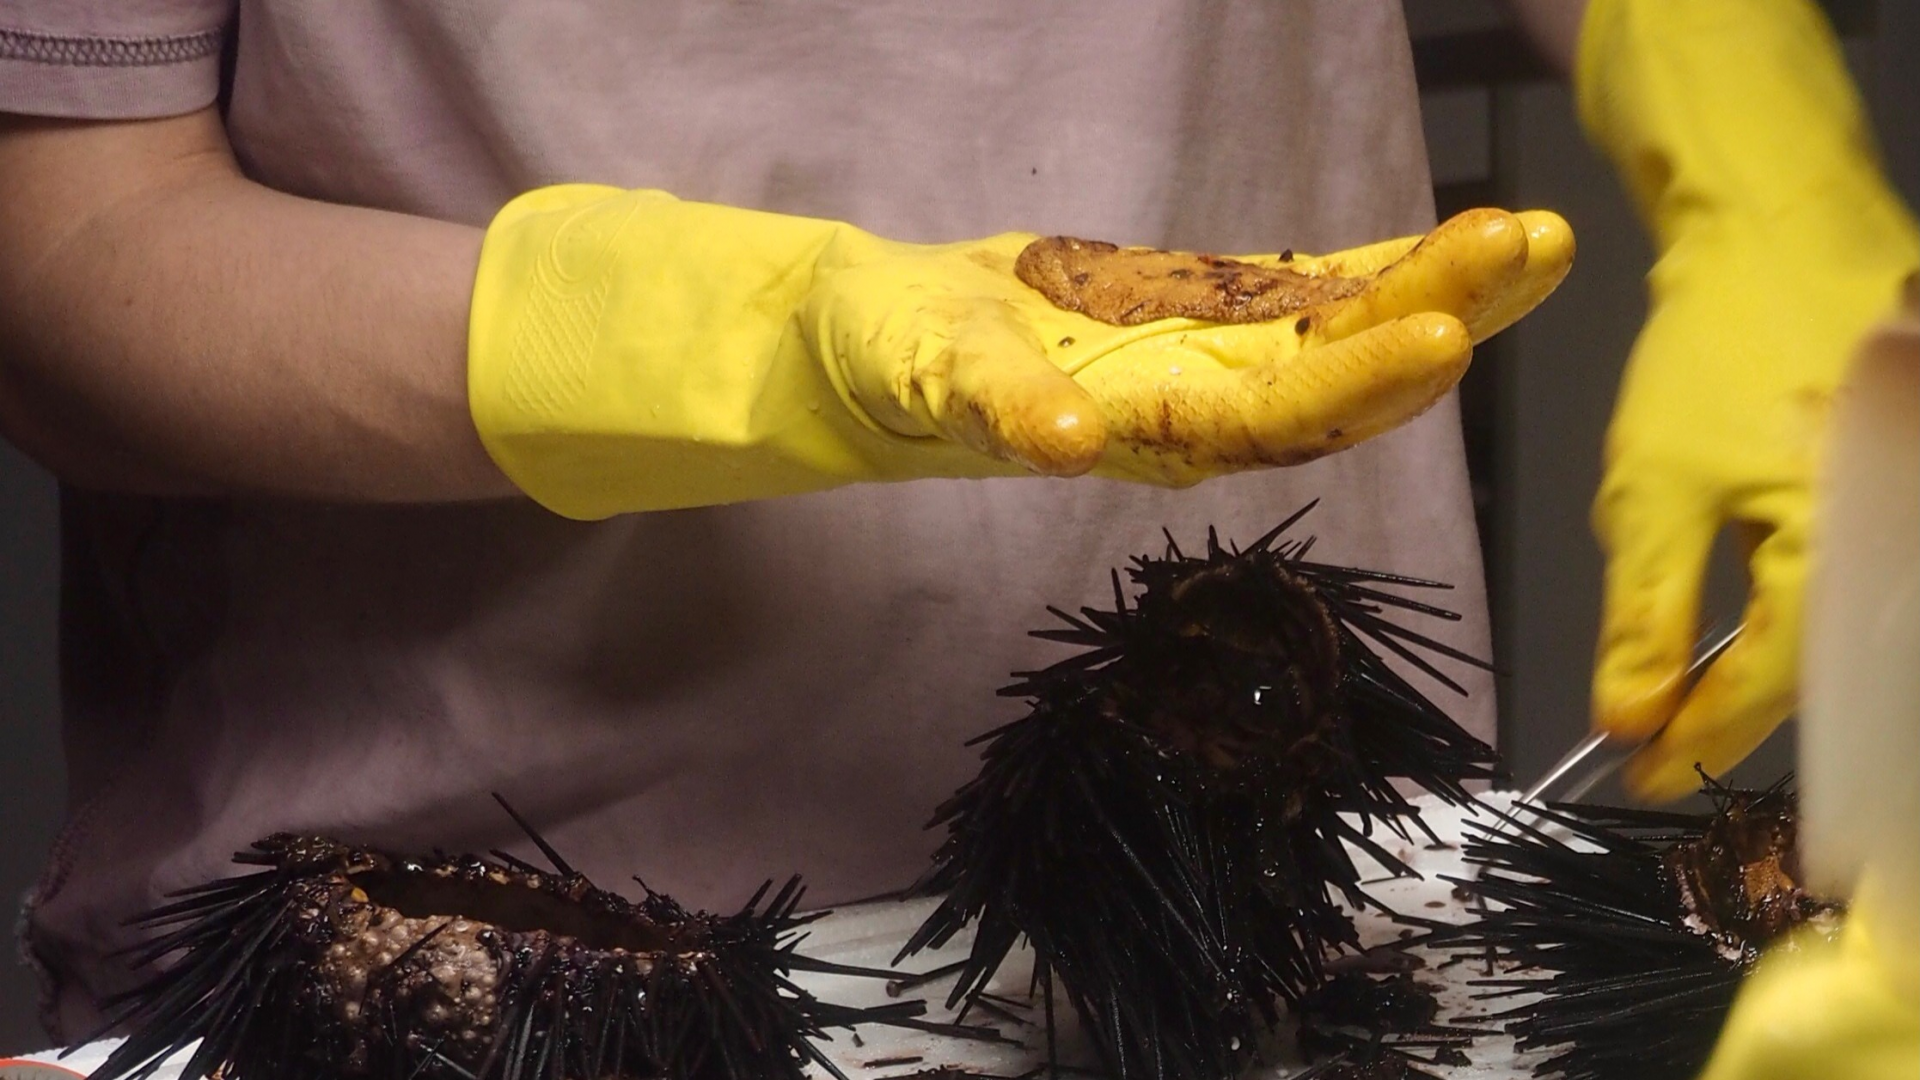 person in pink tshirt wearing yellow rubber gloves holding sea urchin roe in palm